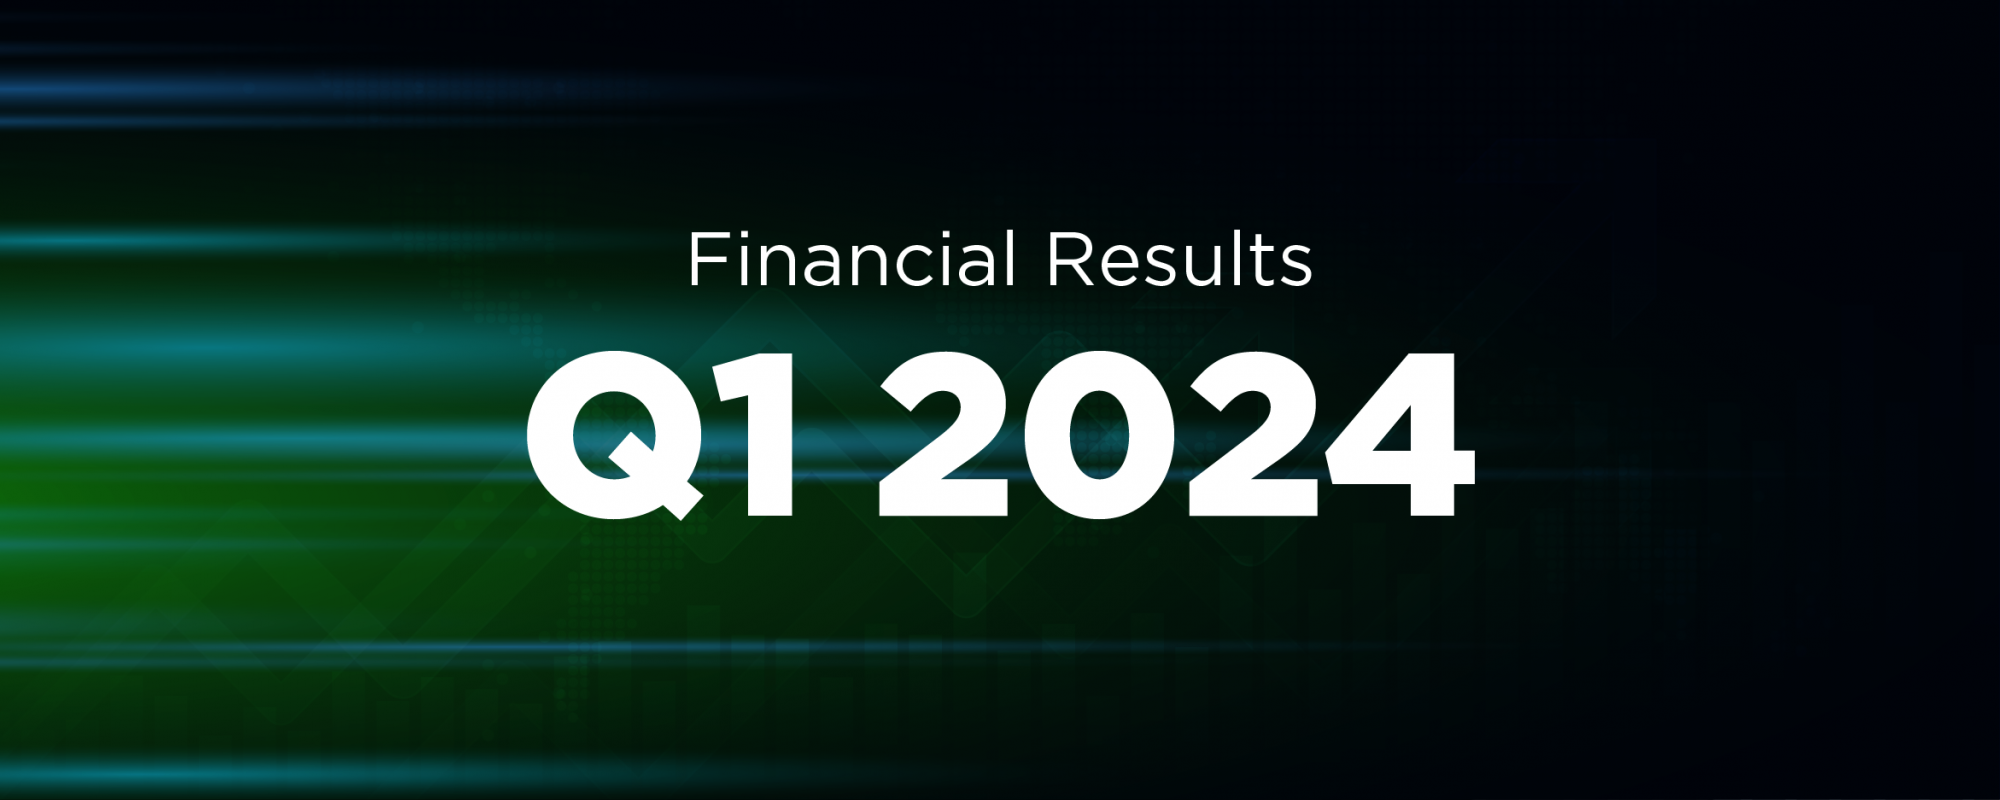 Multiply Group registered AED 393 million in Group Net Profit excluding fair value changes in Q1 2024, with 45% Revenue Growth across its operating portfolio – Continues global acquisitions and declares 2024 Year of Efficiency